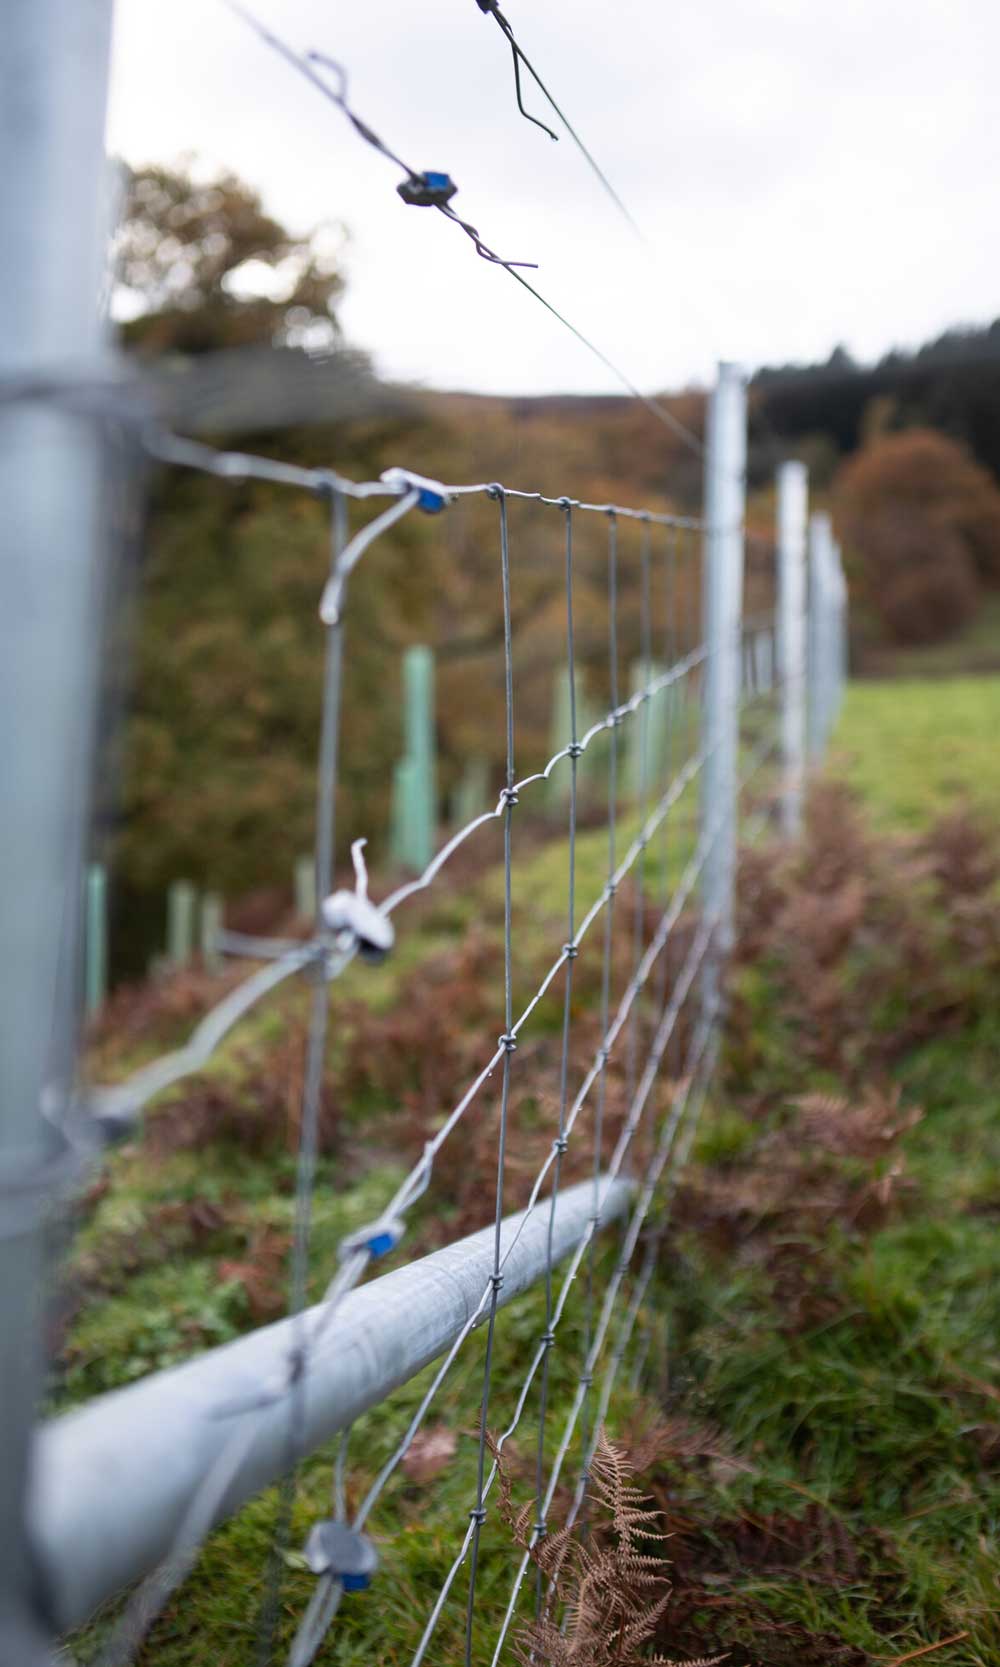 Newly installed metal fencing in a field. Credit Charlie Fox.